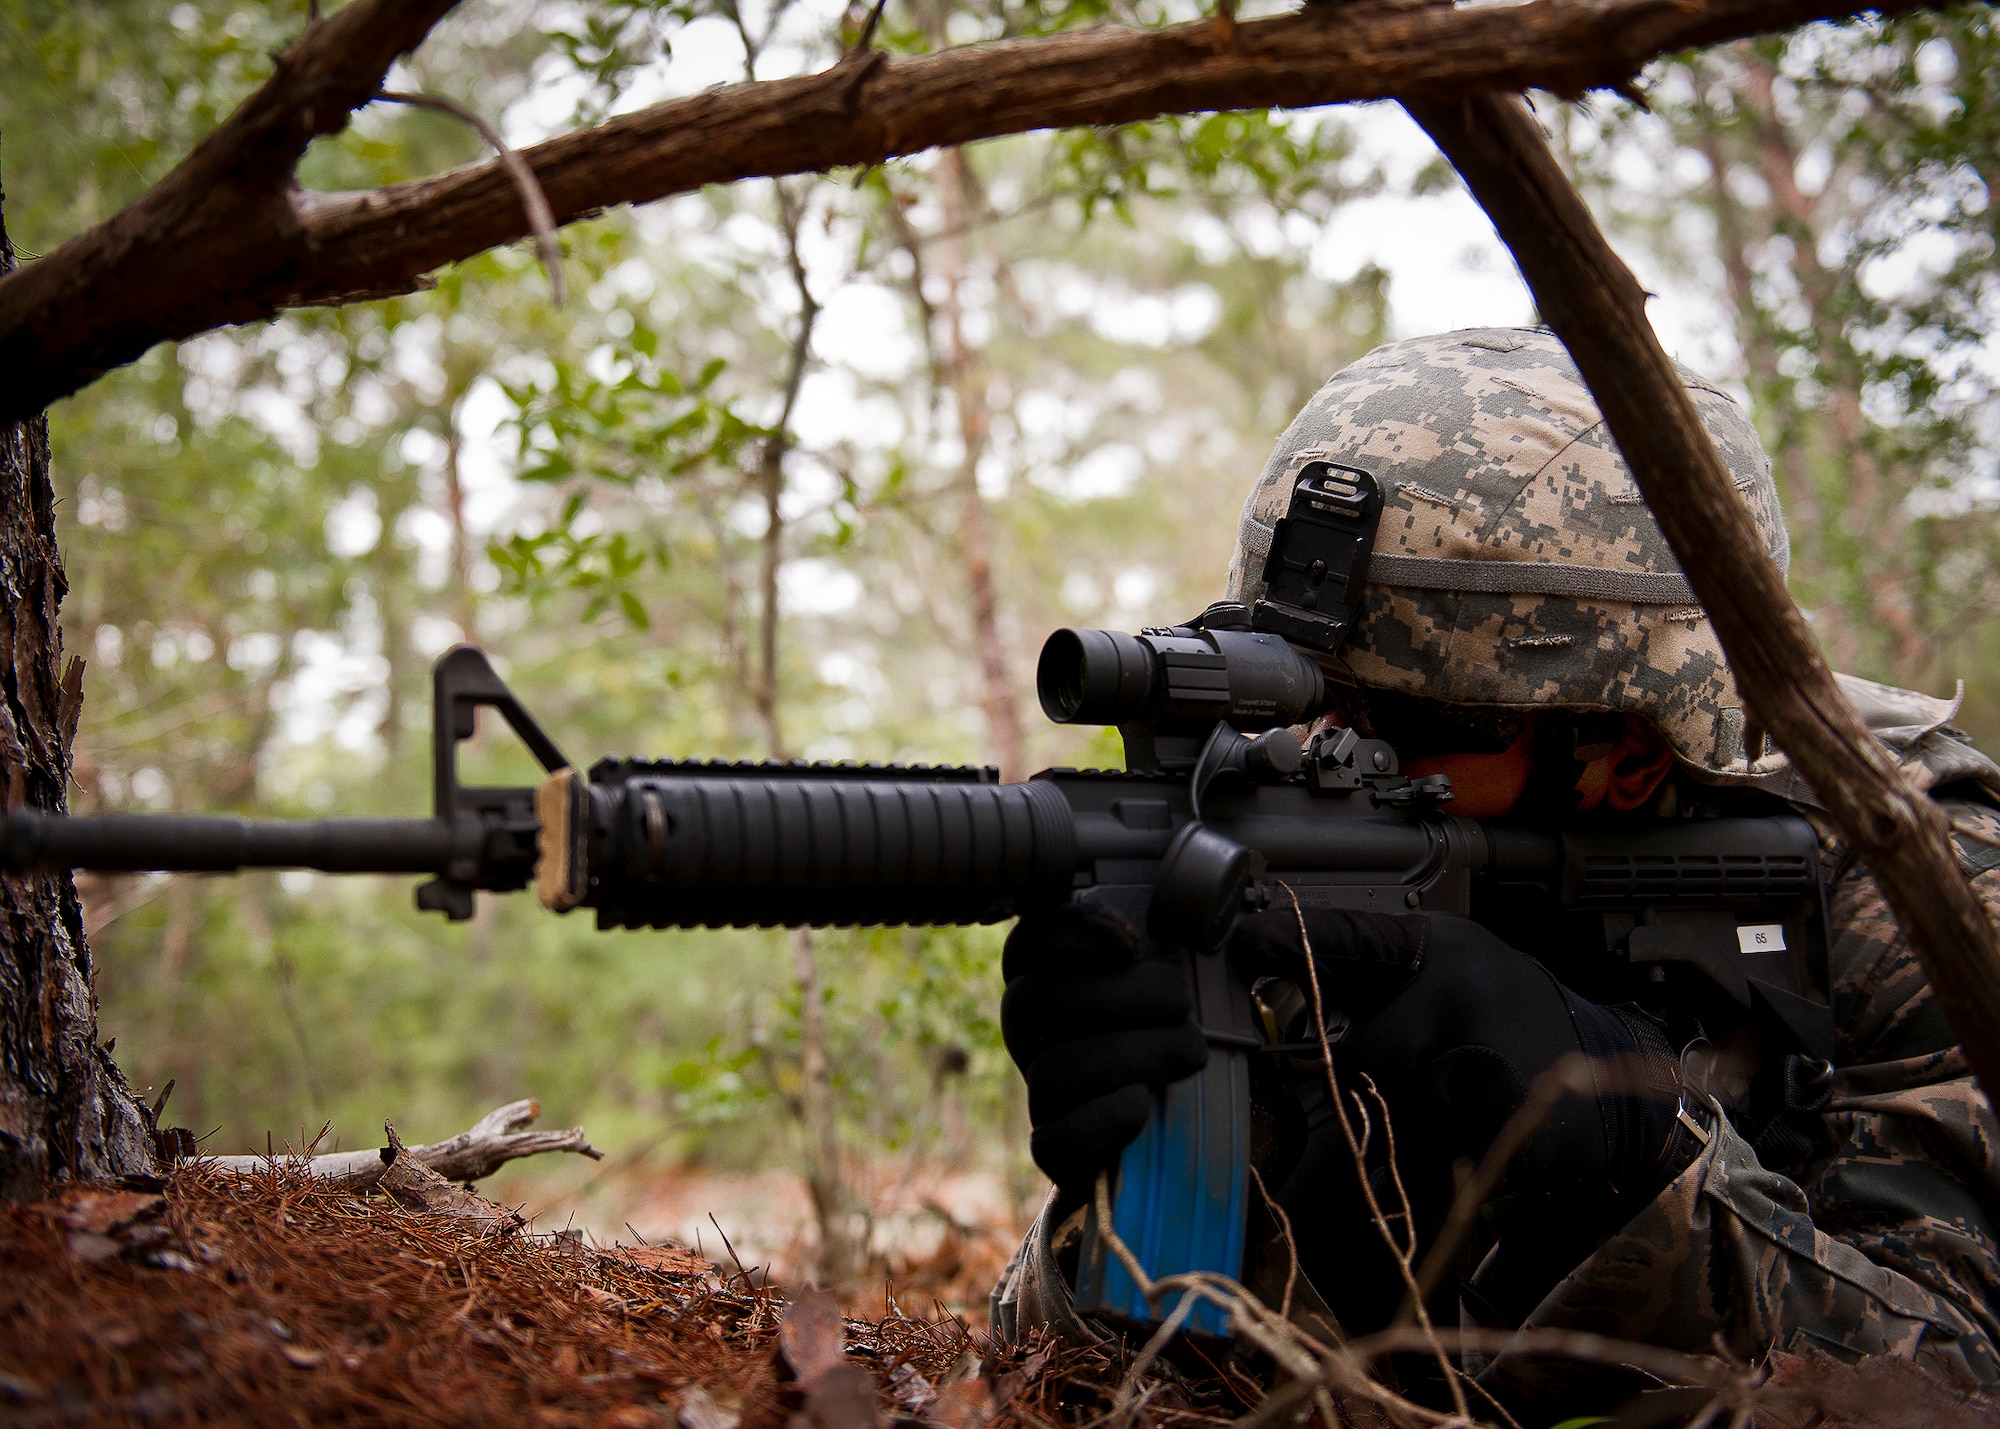 Senior Airman William Whitlow, of the 164th Security Forces Squadron, scans the area from a prone position during a dismounted patrol as part of the three-day Brave Defender field training exercise May 19 at Eglin Air Force Base, Fla.  The exercise is the culmination of Air Force Materiel Command’s six-week security forces deployment training, administered by the 96th Ground Combat Training Squadron. GCTS instructors teach 10 training classes a year, which consists of improvised explosive device detection and reaction, operating in an urban environment, mission planning, land navigation and casualty care and more. More than 140 active-duty and National Guard Airmen attended this training. (U.S. Air Force photo/Samuel King Jr.)